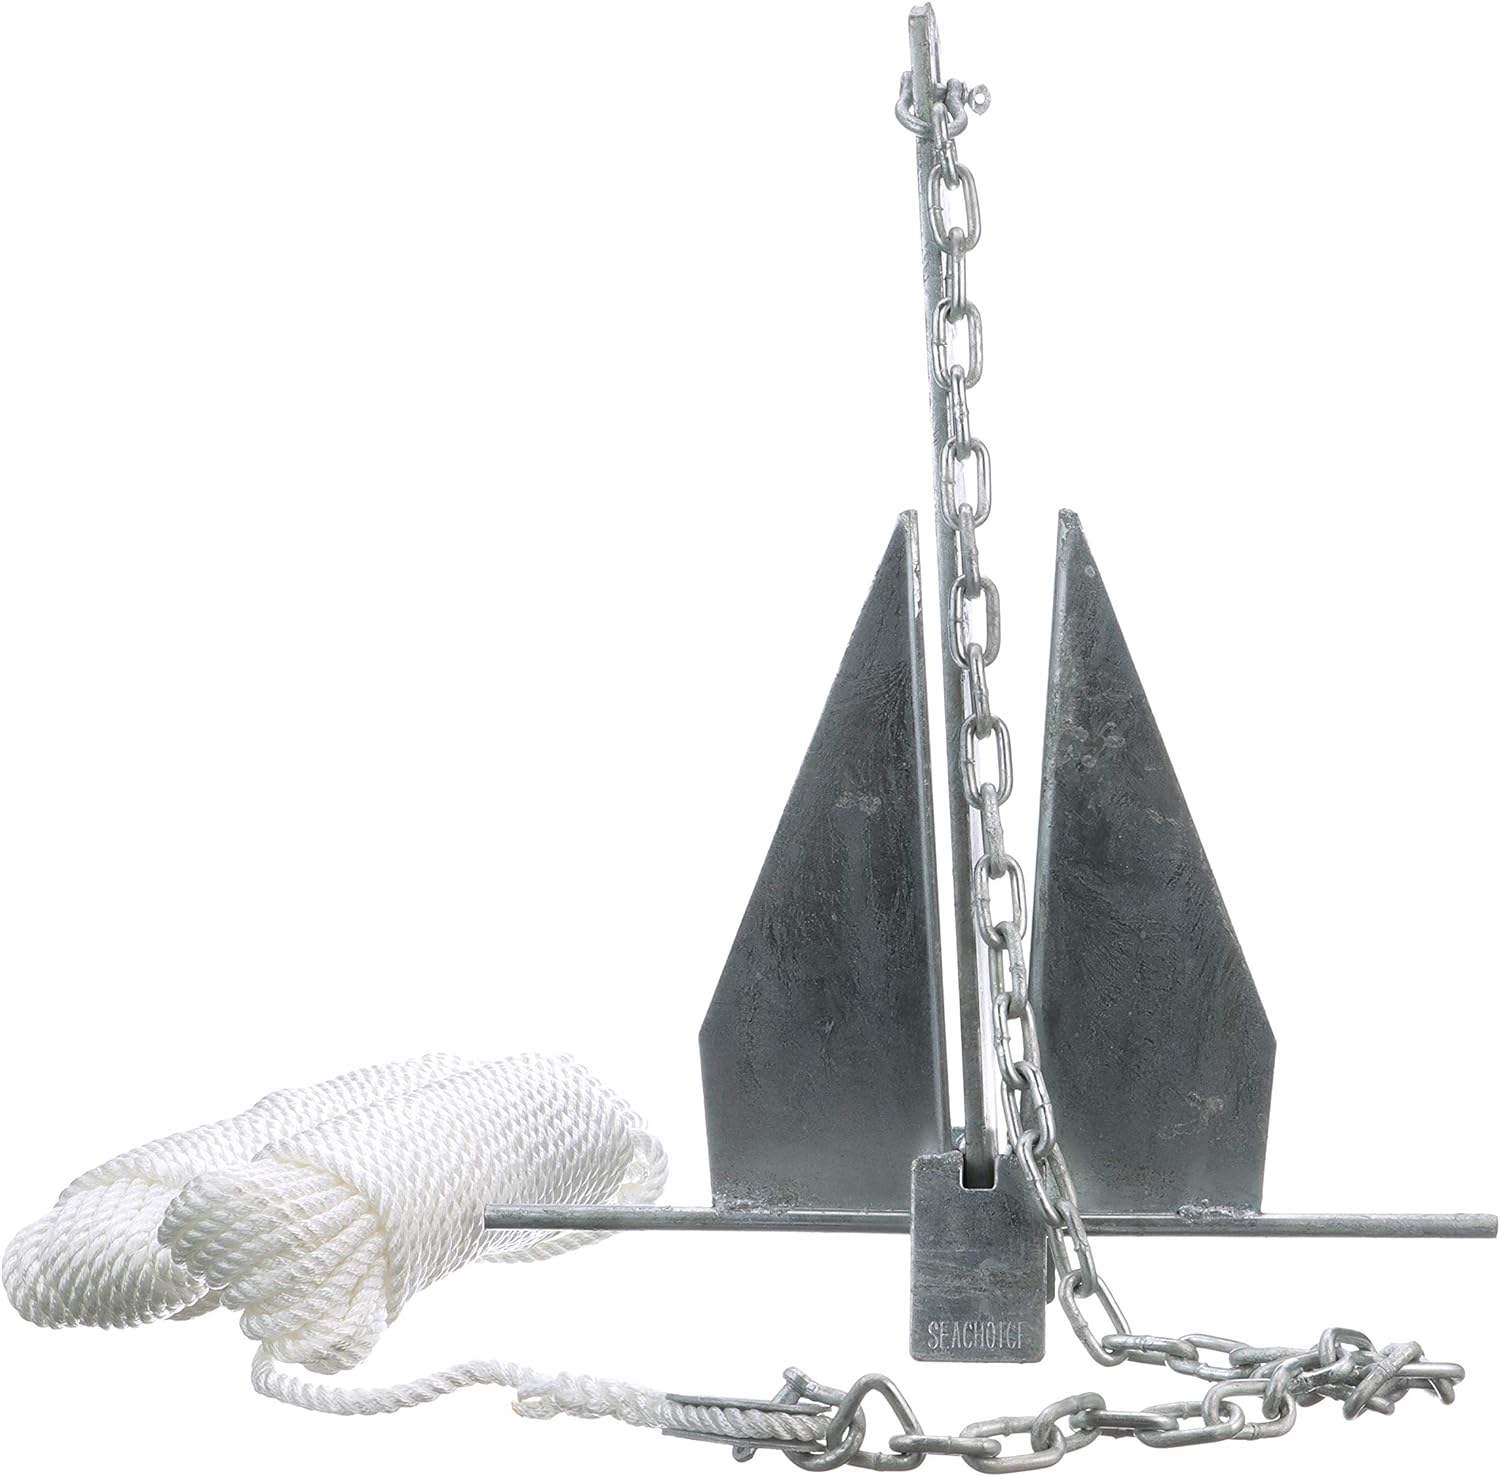 Seachoice Deluxe Anchor – With Slip Ring Shank – Hot-Dipped Galvanized Steel or PVC Coated – Multiple Sizes